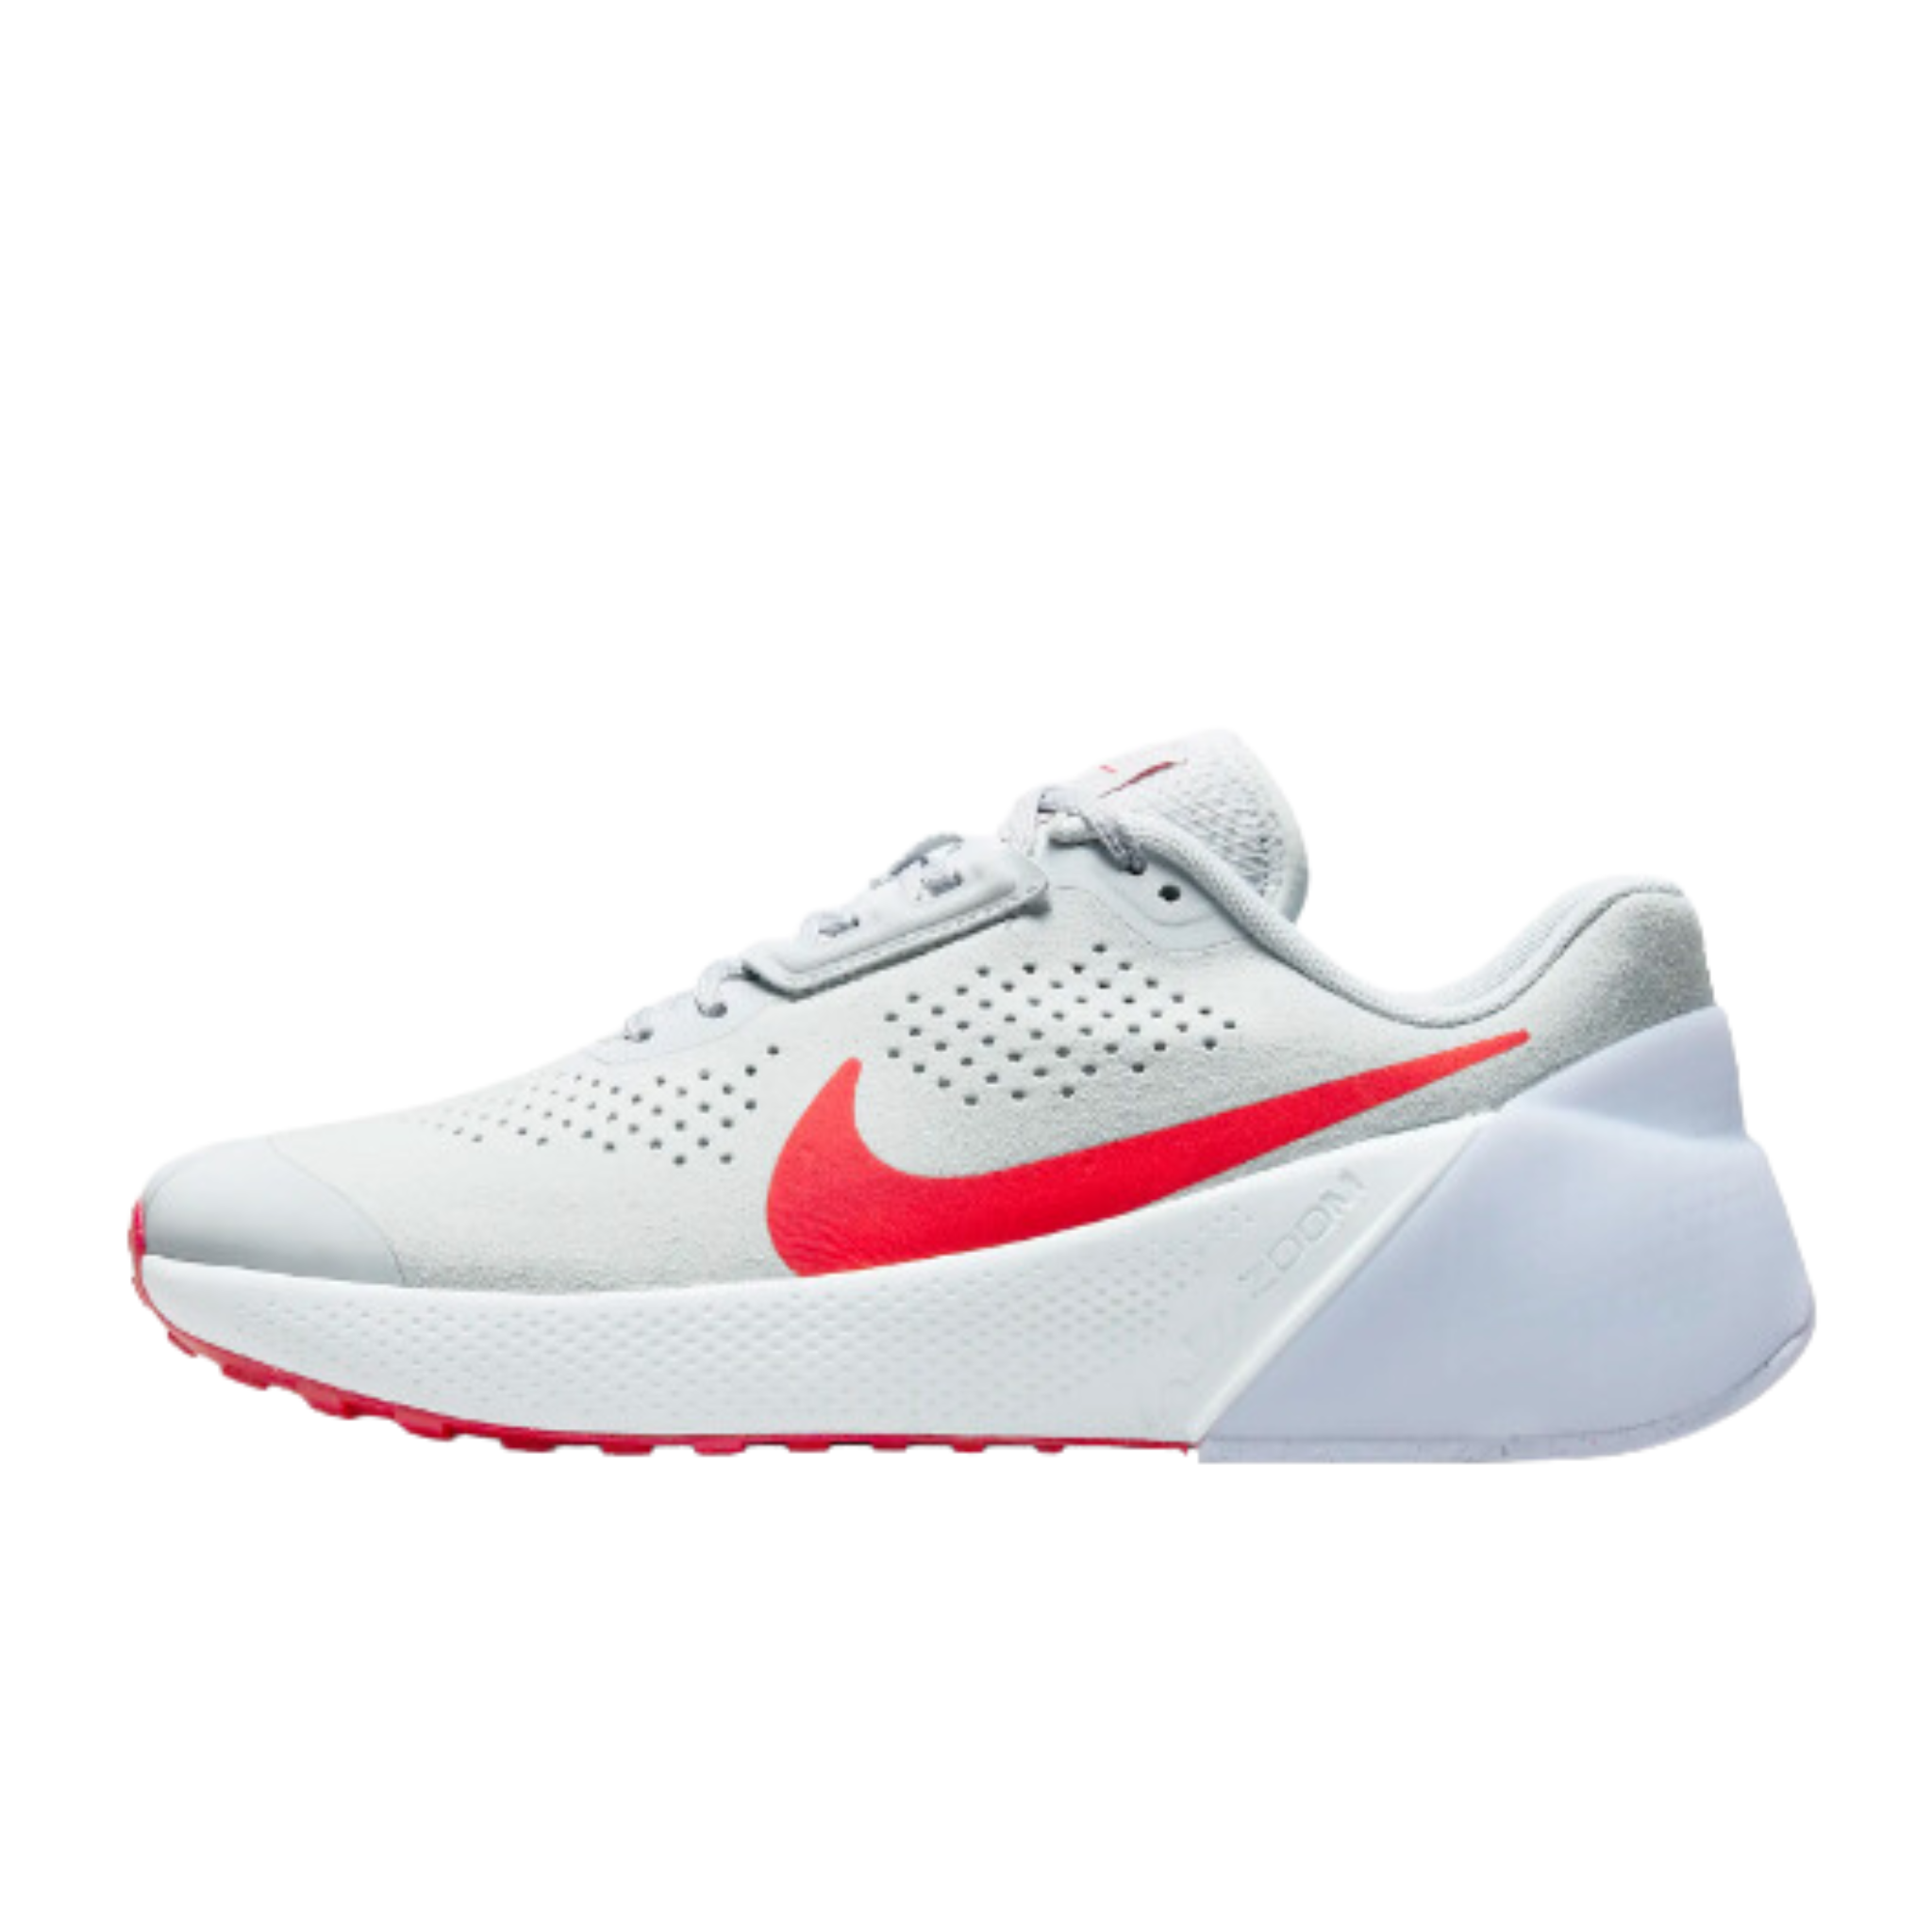 Nike Men's Air Zoom TR1 Workout Shoes